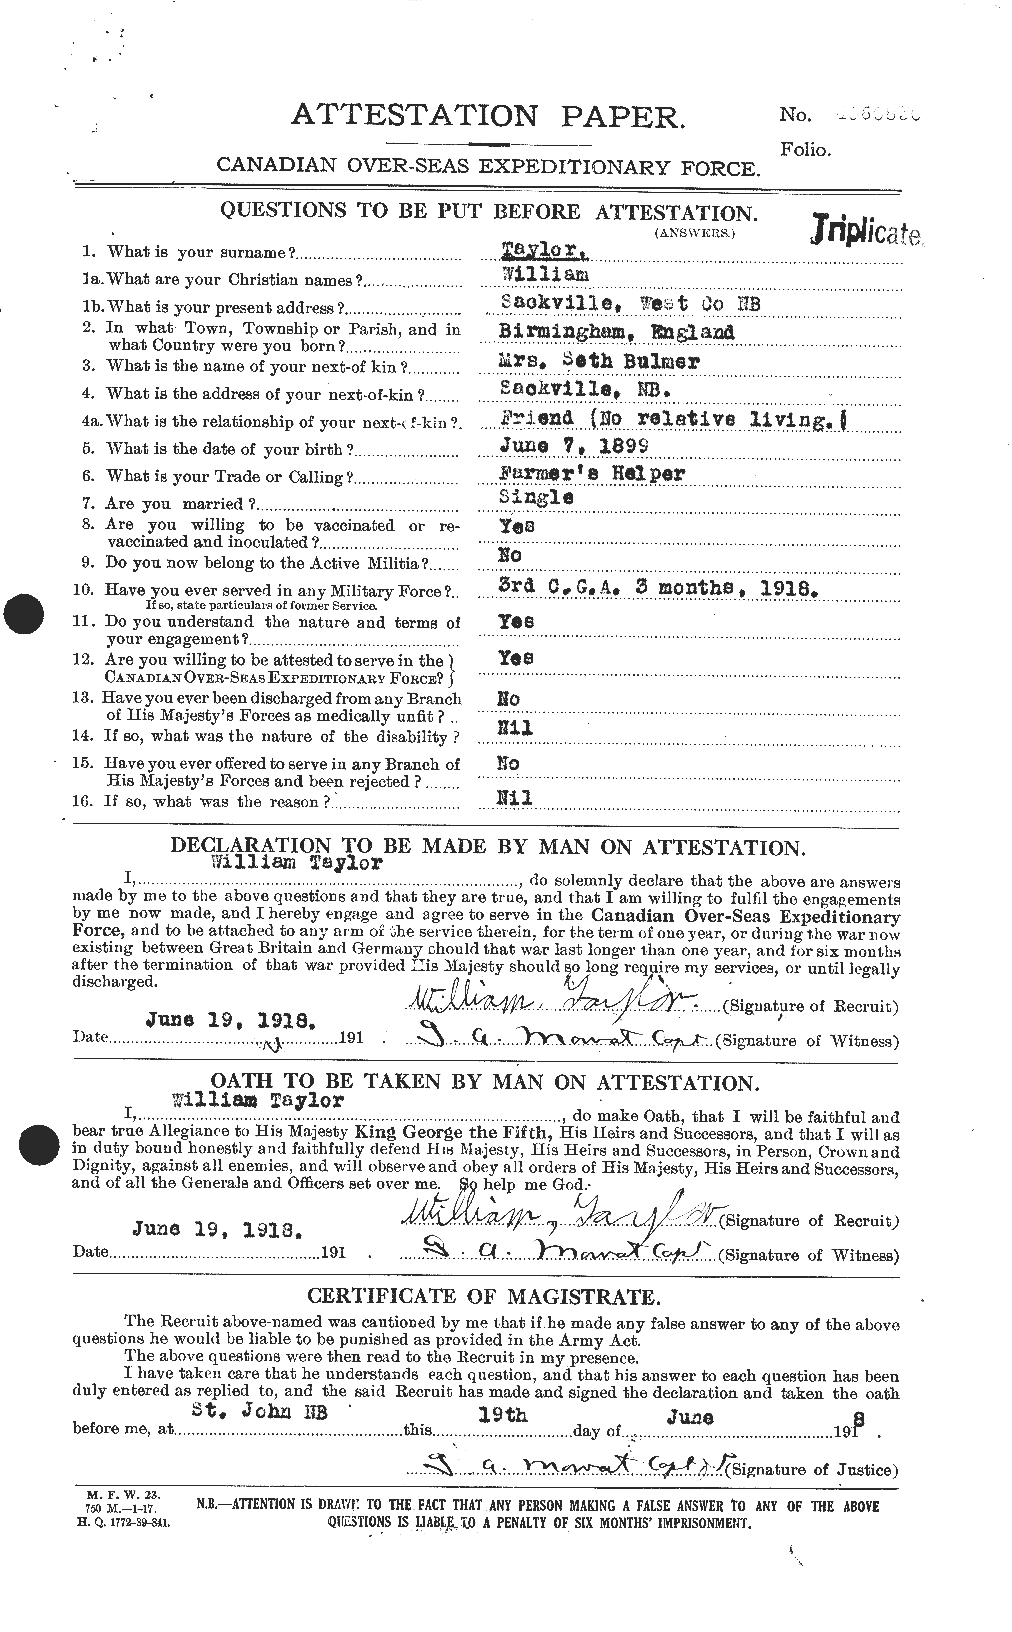 Personnel Records of the First World War - CEF 628118a